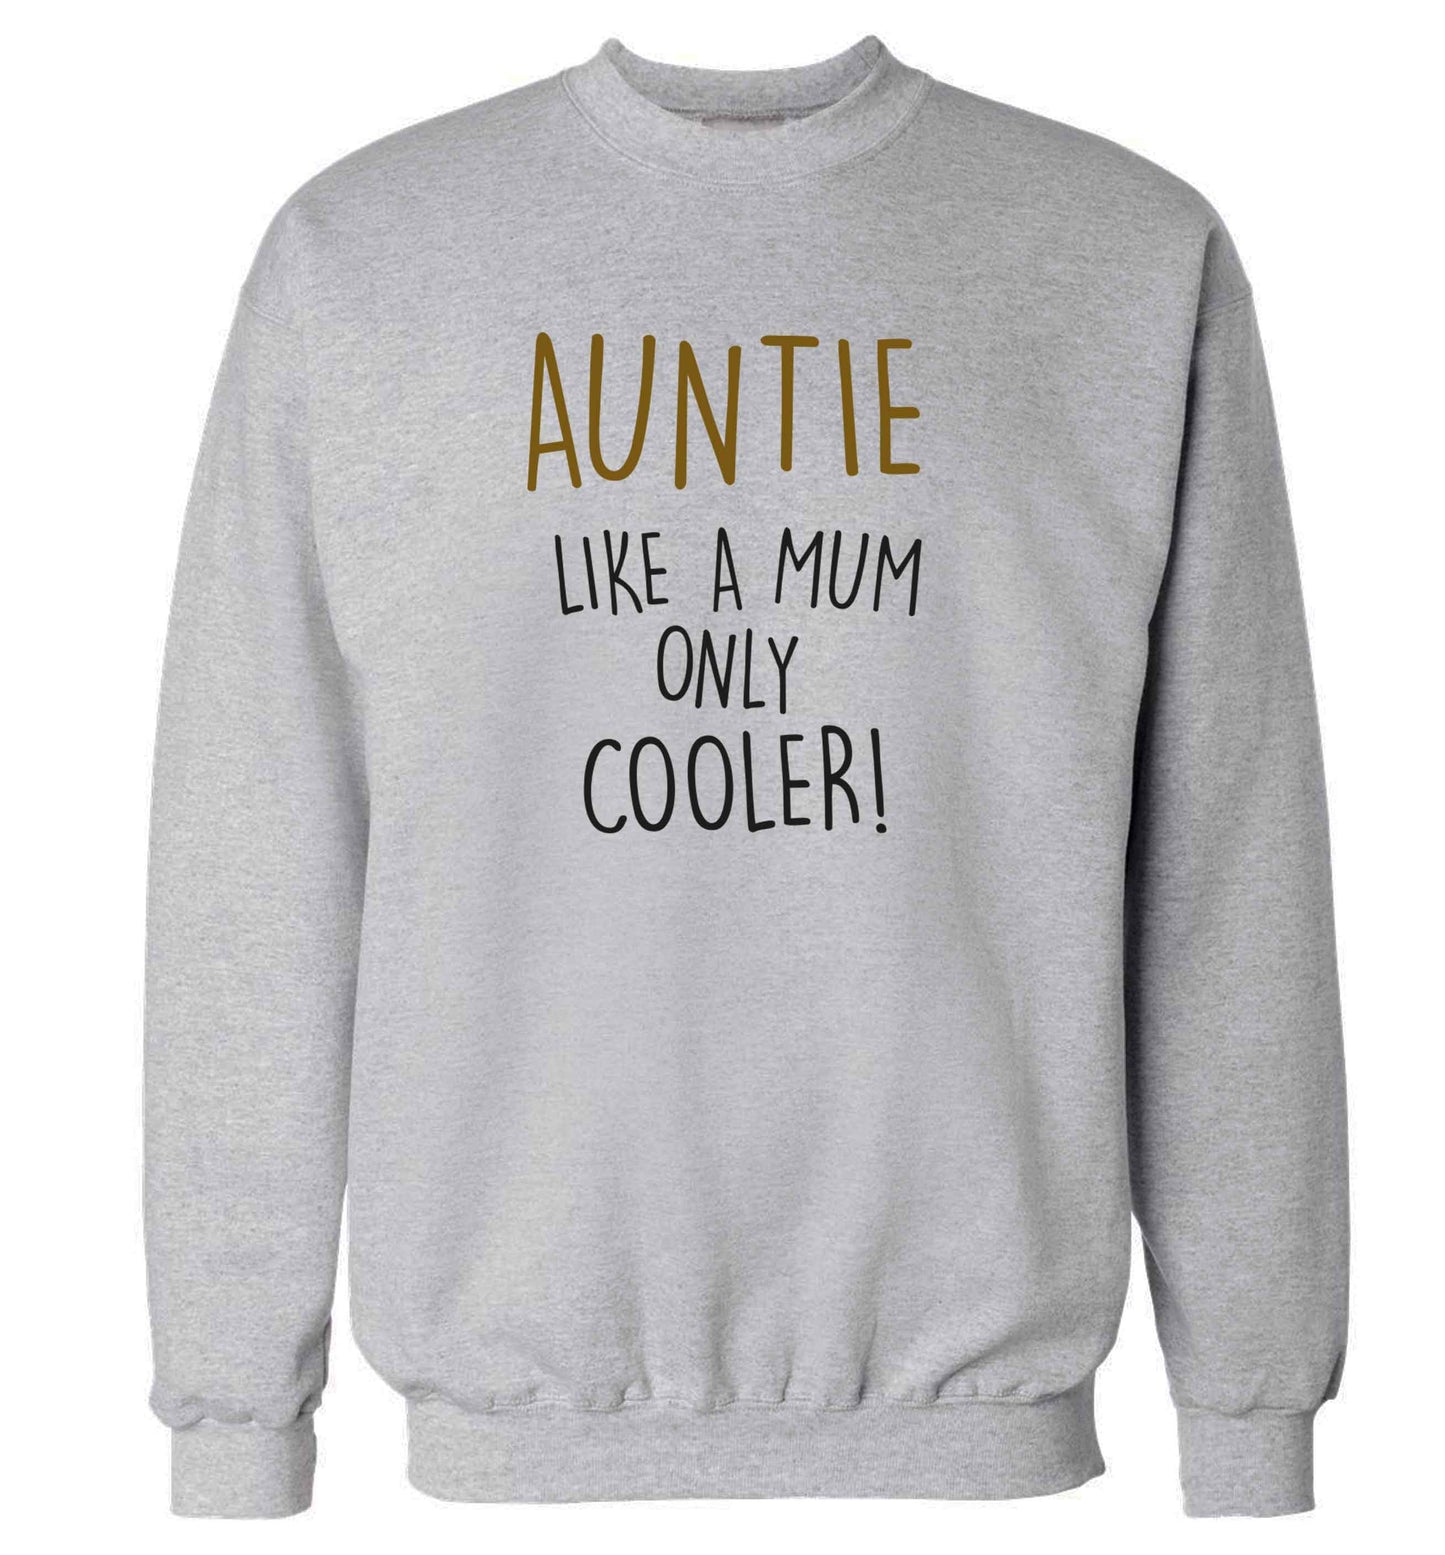 Auntie like a mum only cooler adult's unisex grey sweater 2XL